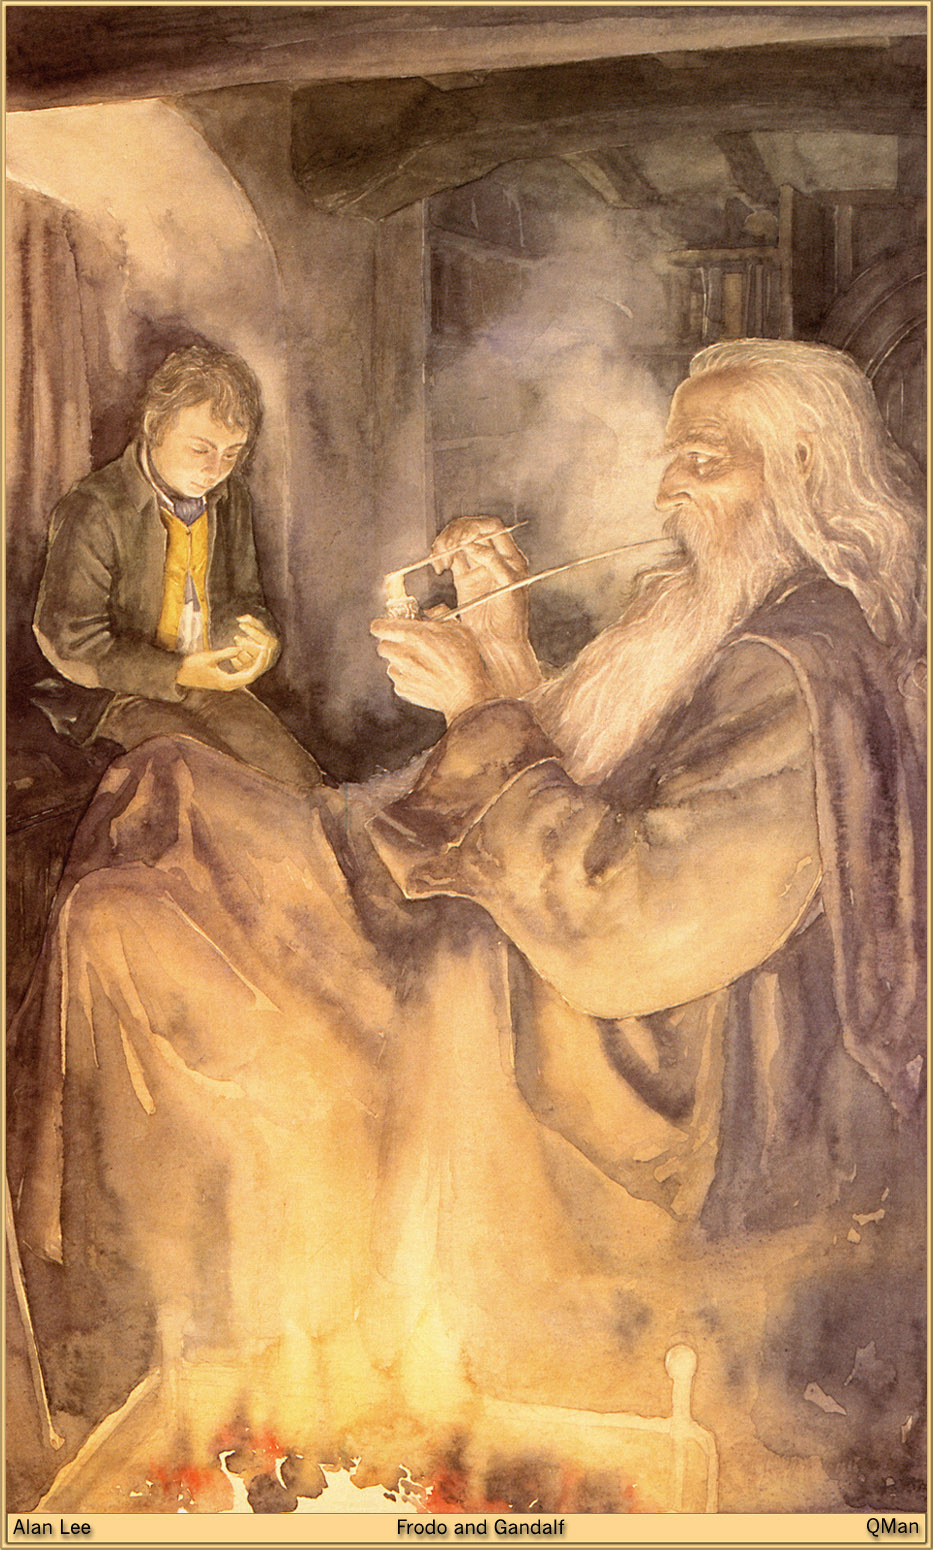 Alan Lee. The Lord of the Rings